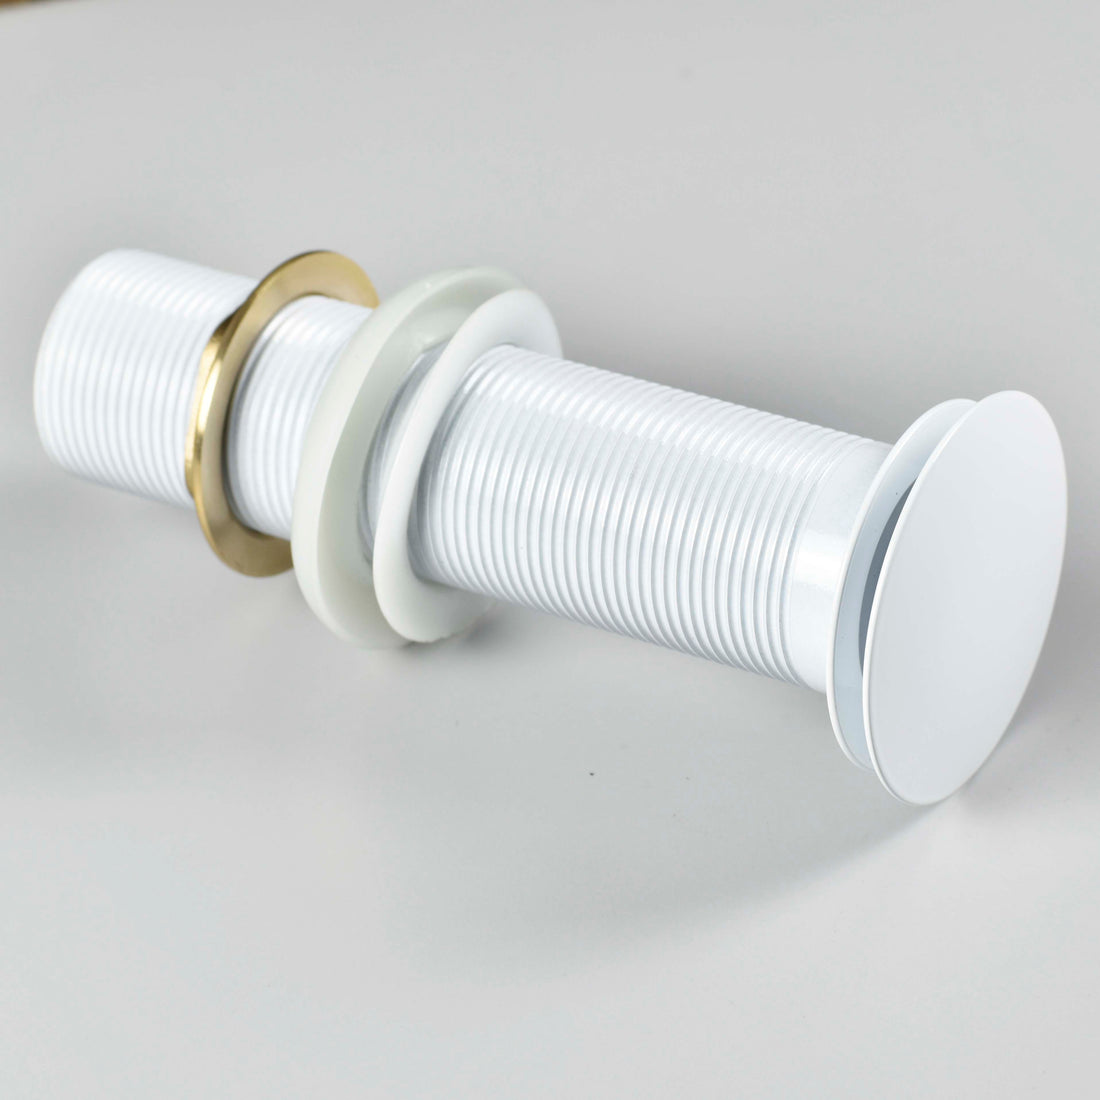 InArt 7 Inch Brass Pop-Up Waste Coupling for Wash Basin with Full Thread Glossy Finish - White - InArt-Studio